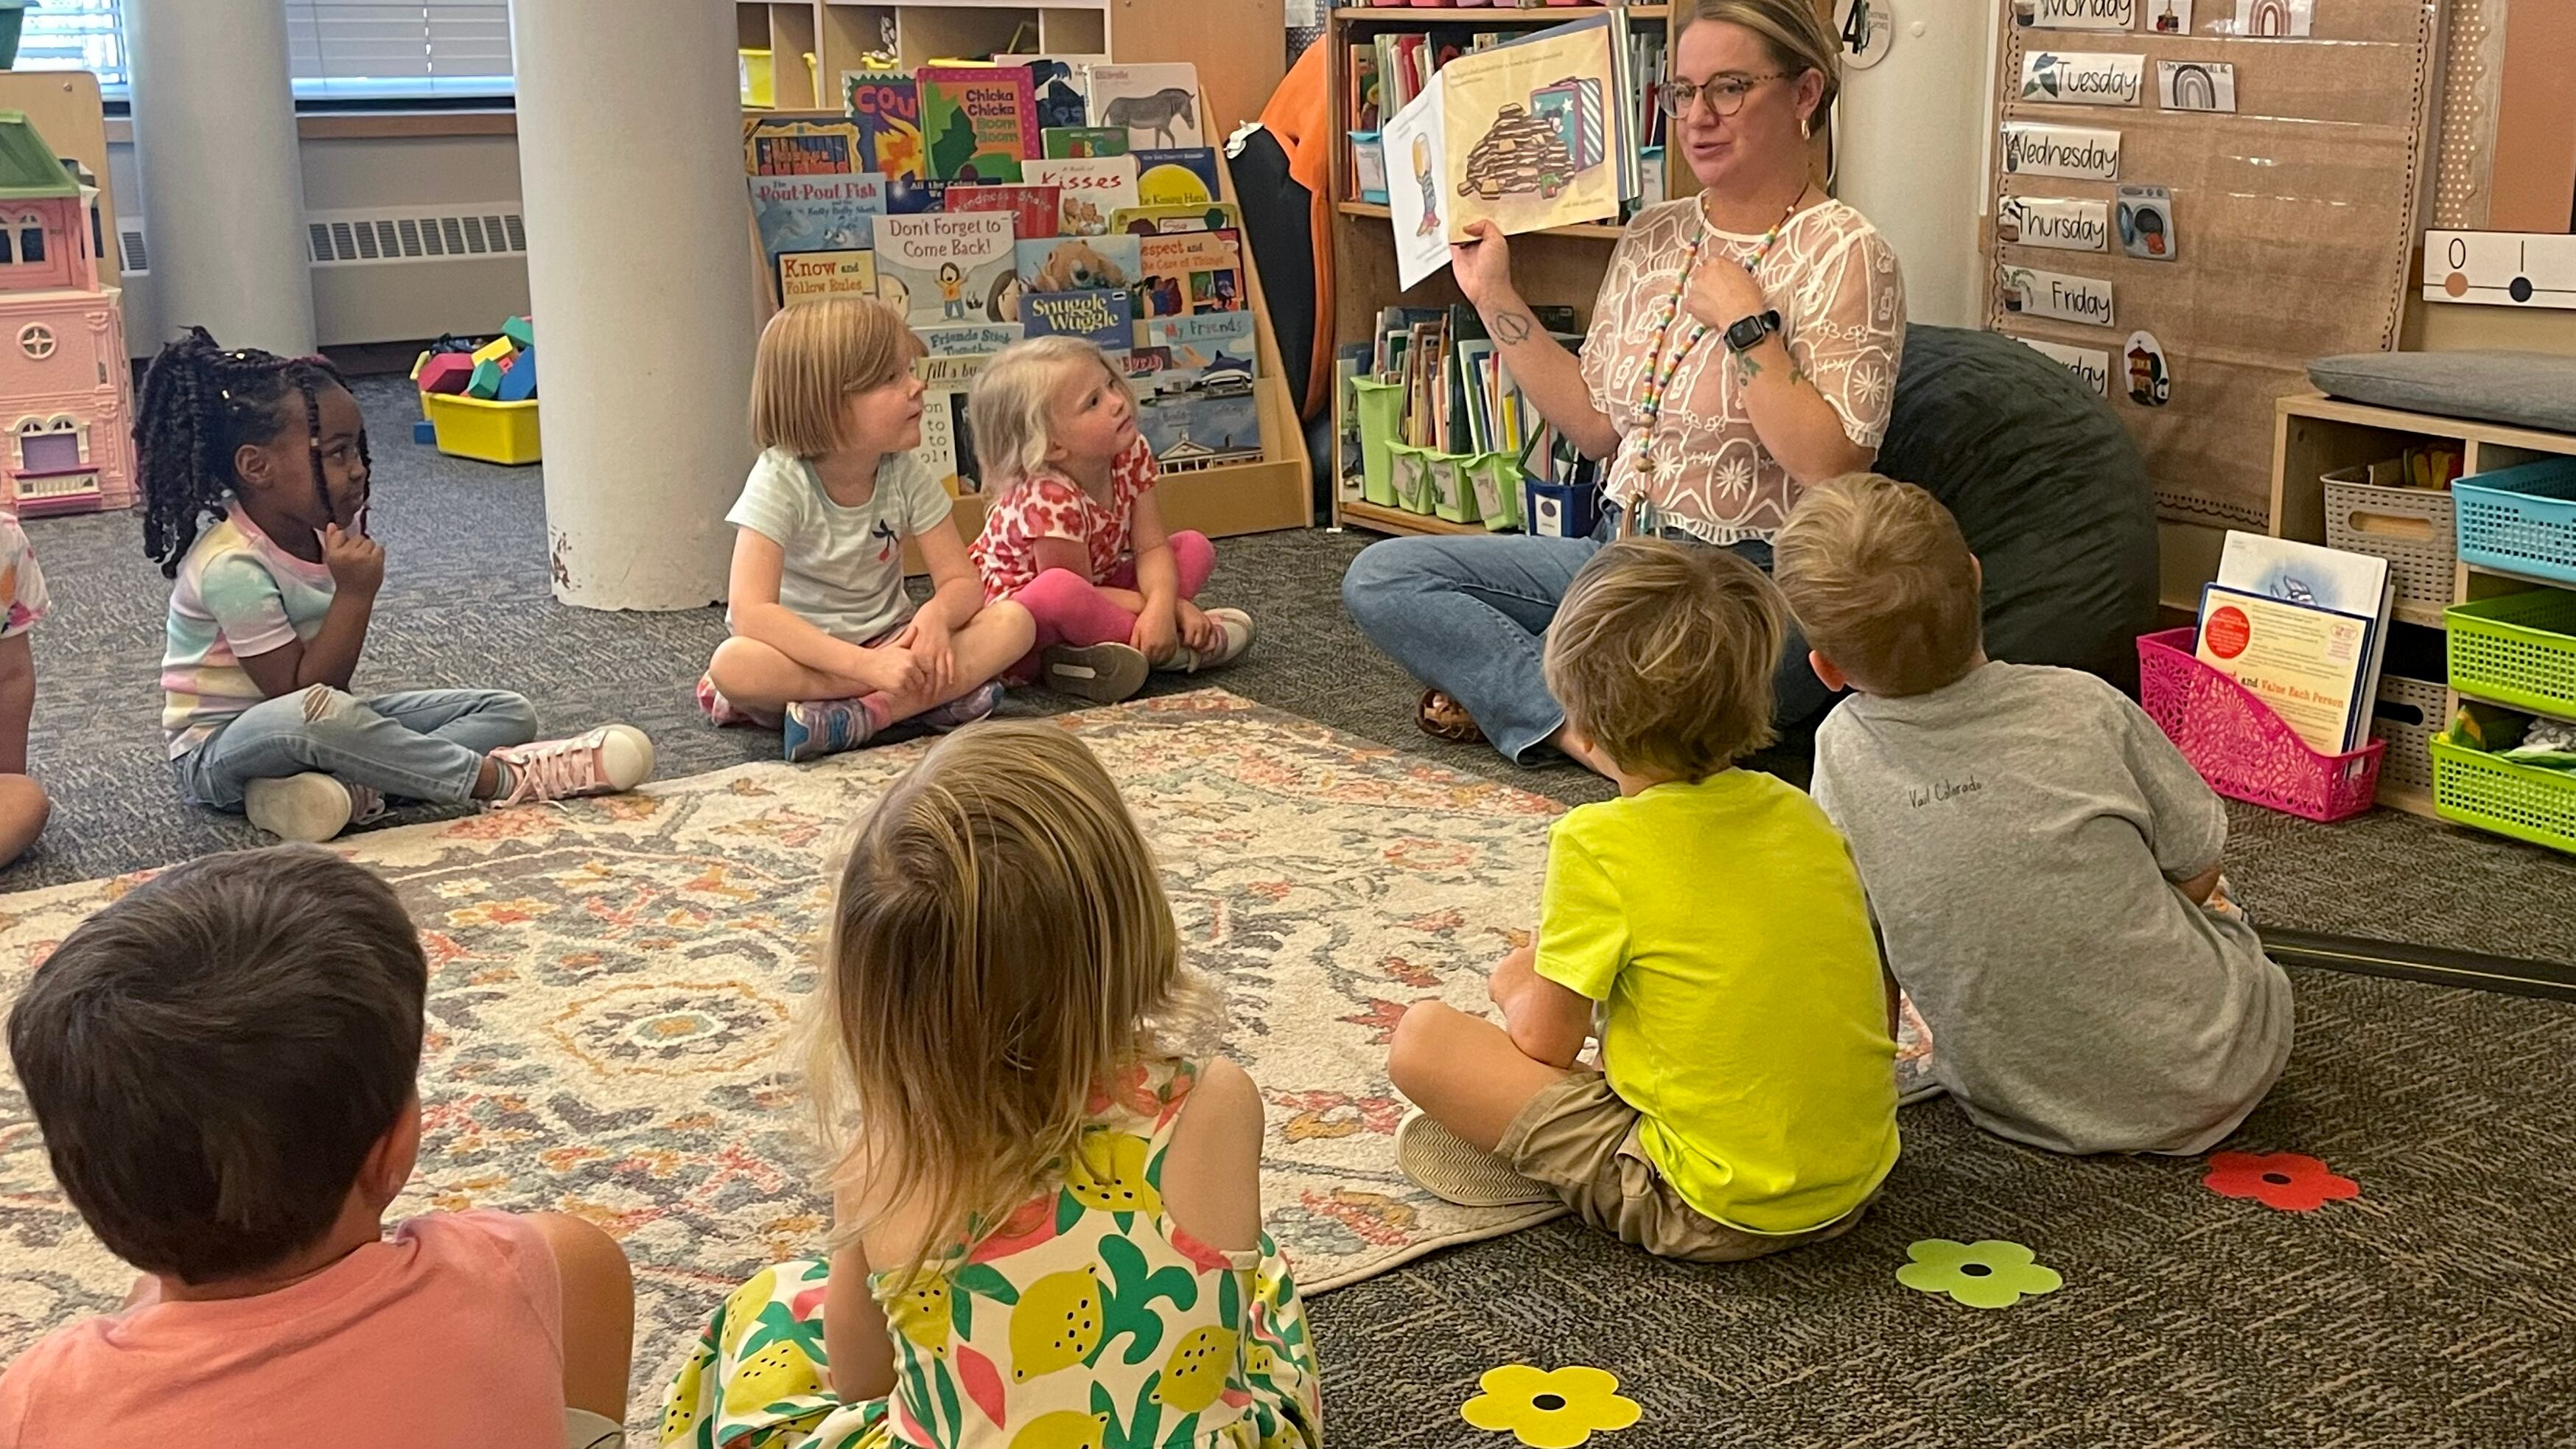 A teacher sitting cross-legged reads a picture book to preschool students sitting in a circle around her.